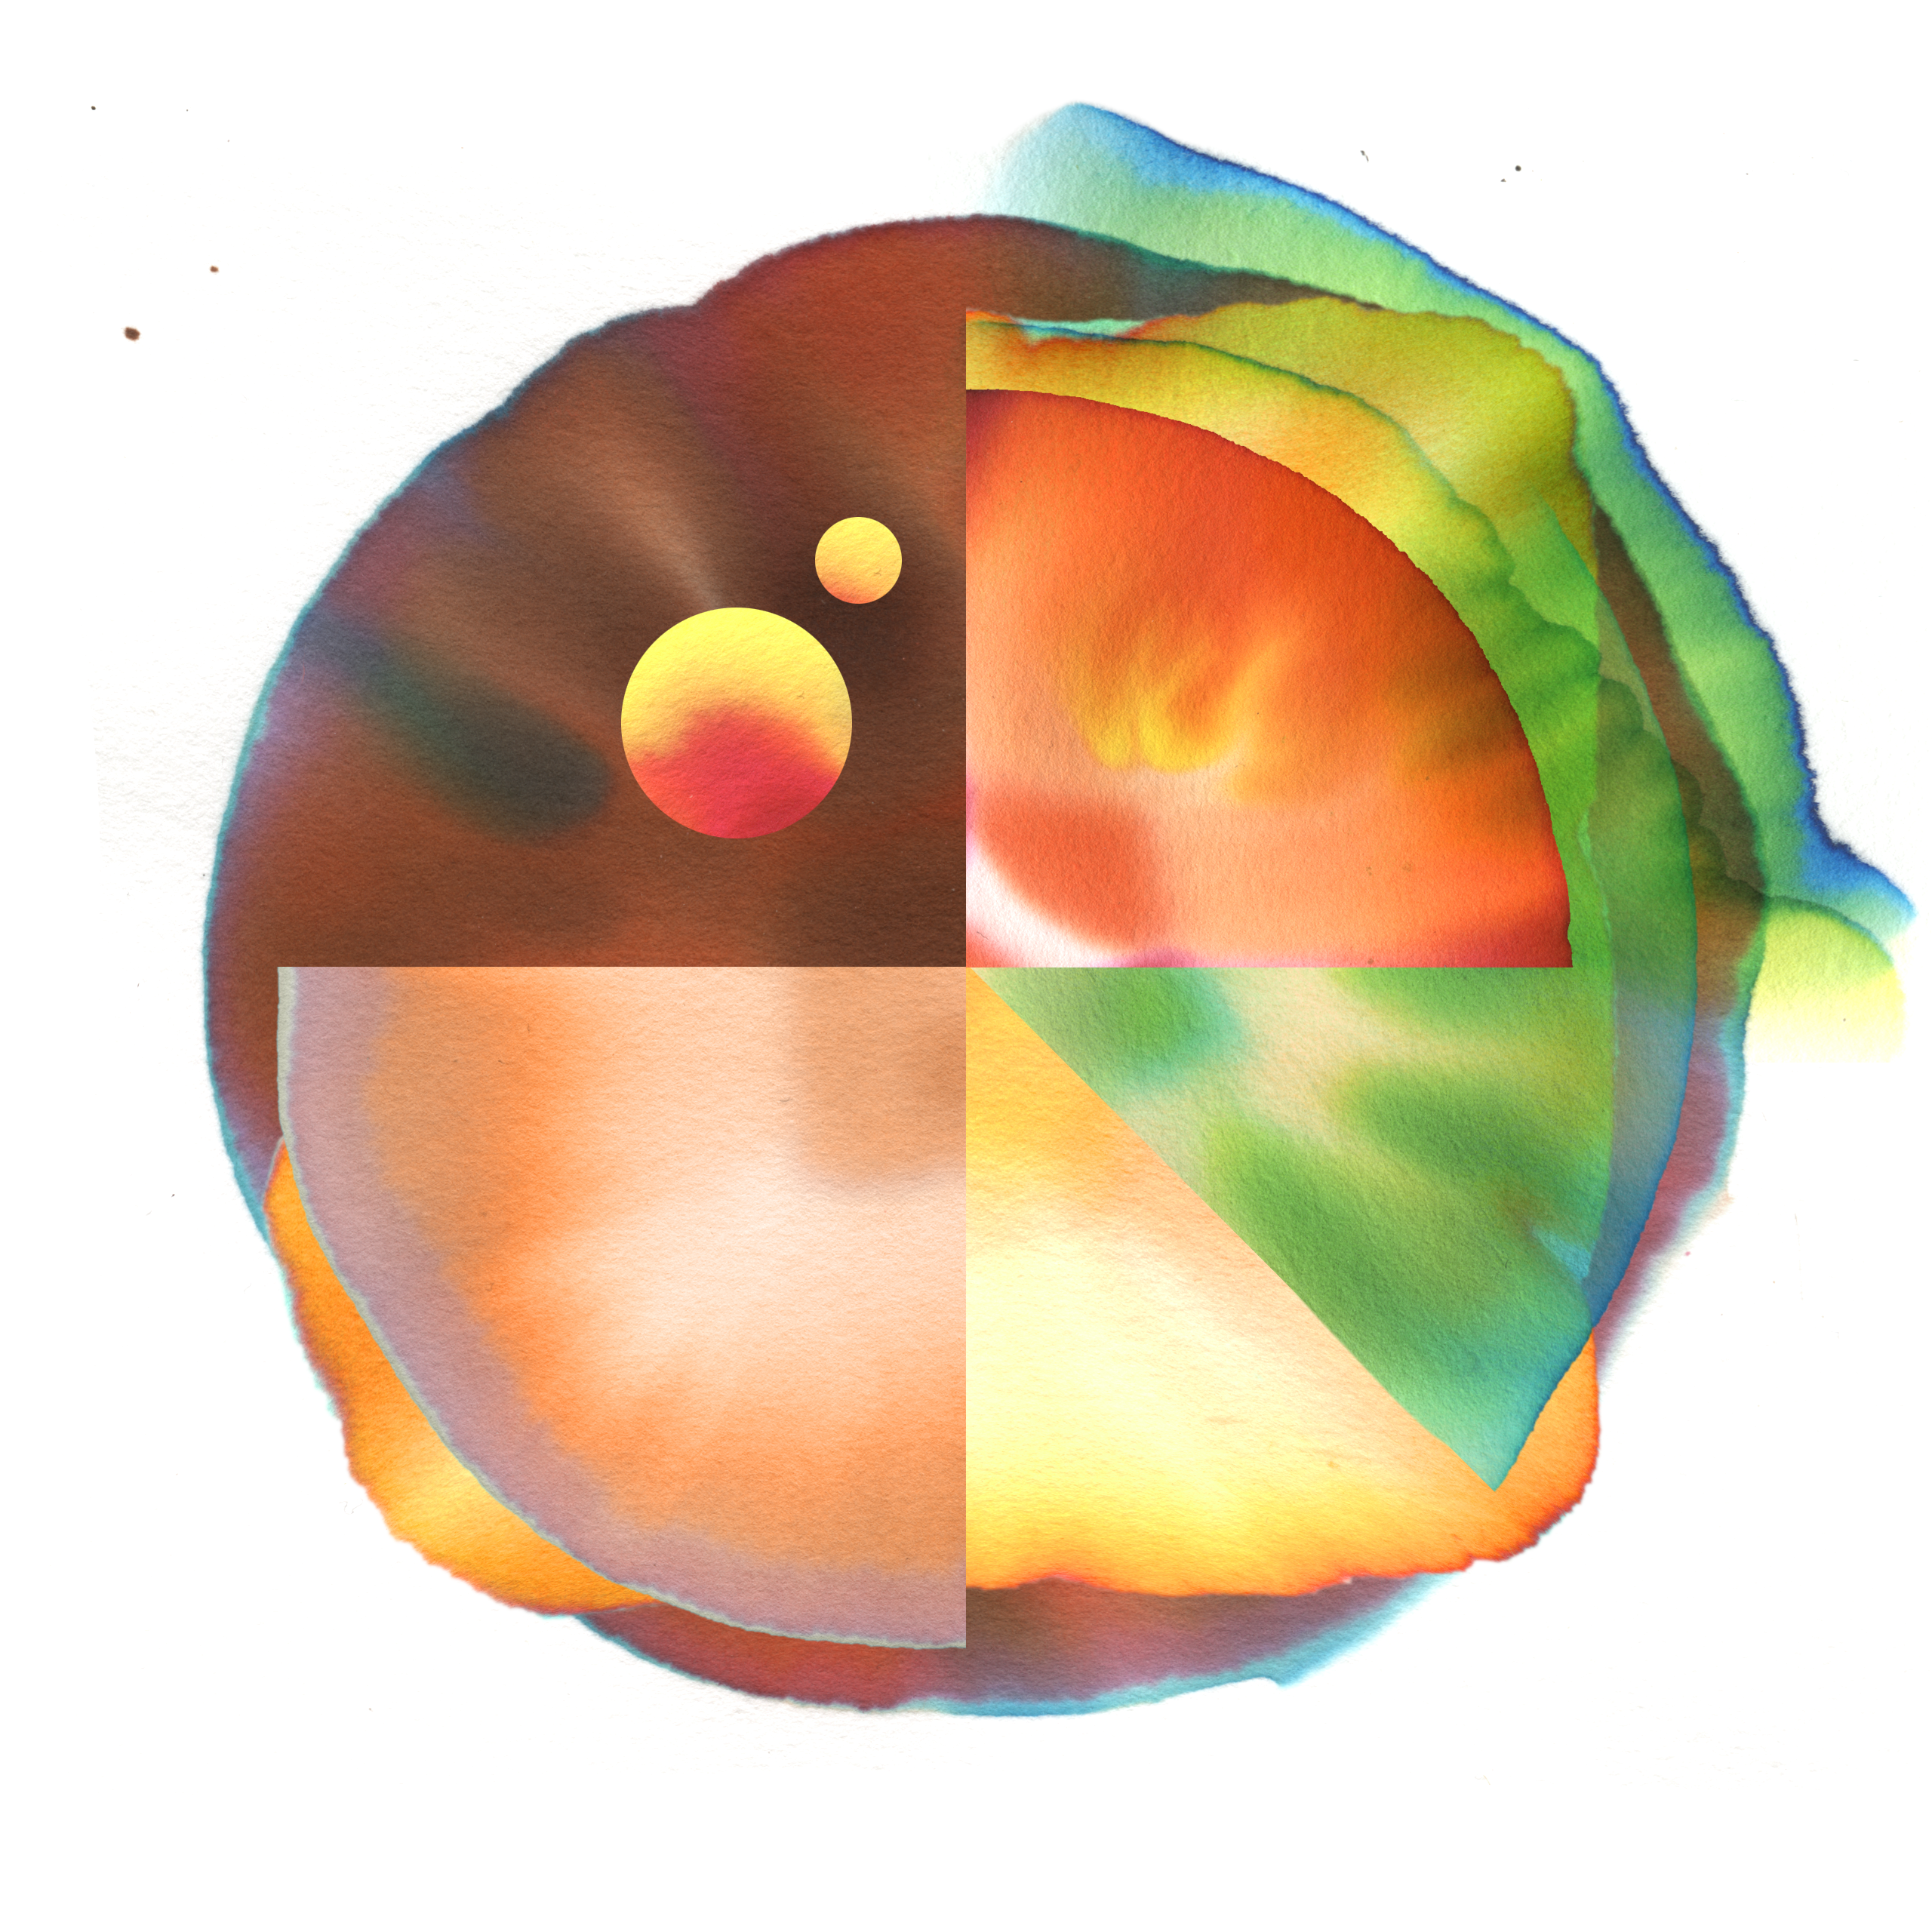 Abstract generative image of a hamburger: a round blob divided in four parts, in browns, oranges, and greens.